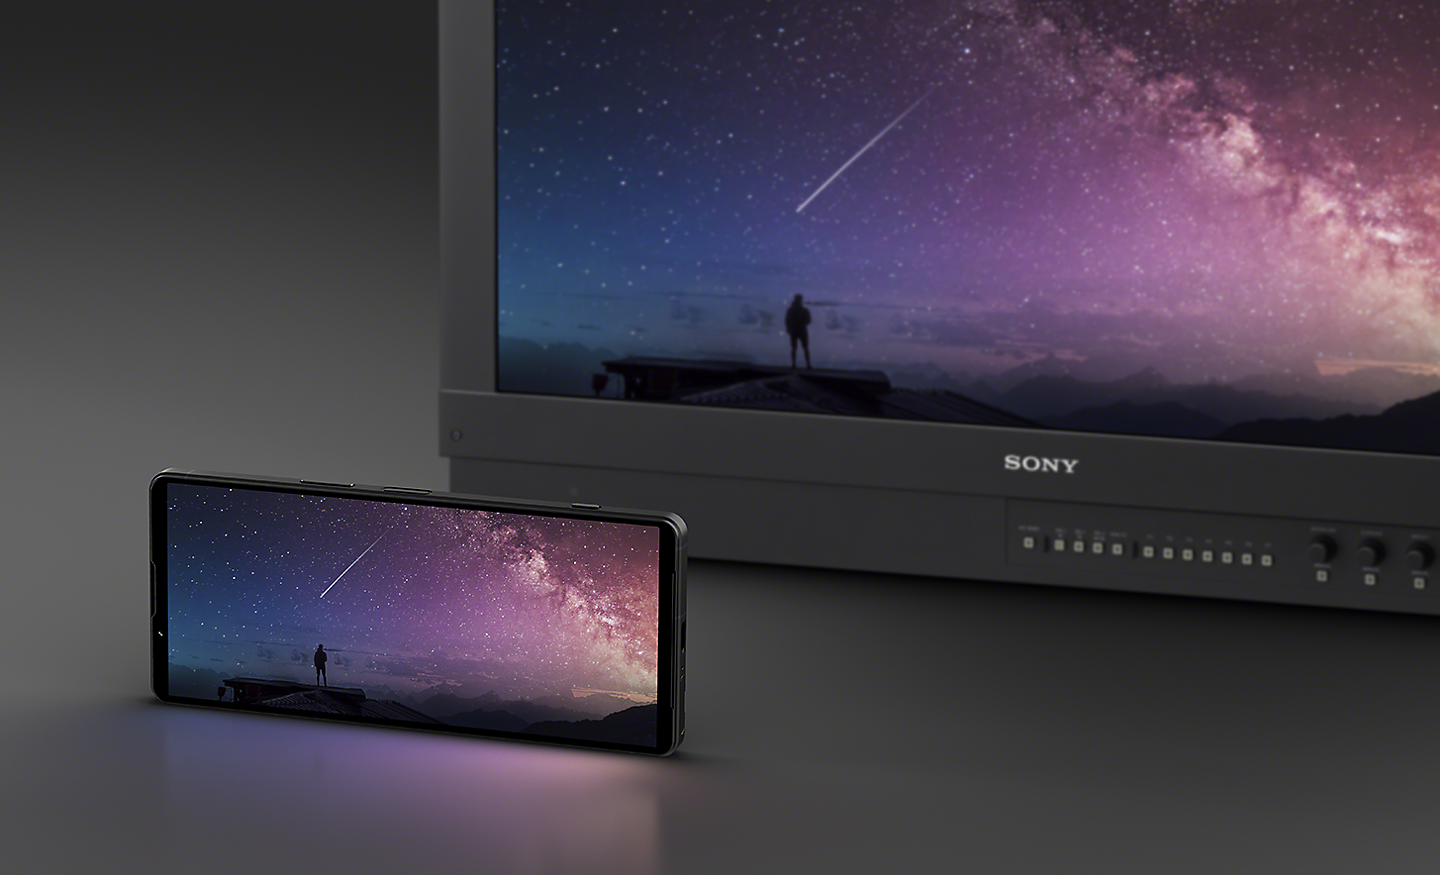 An Xperia 1 V in landscape position in front of a Sony professional colour monitor – both display the same image of the night sky